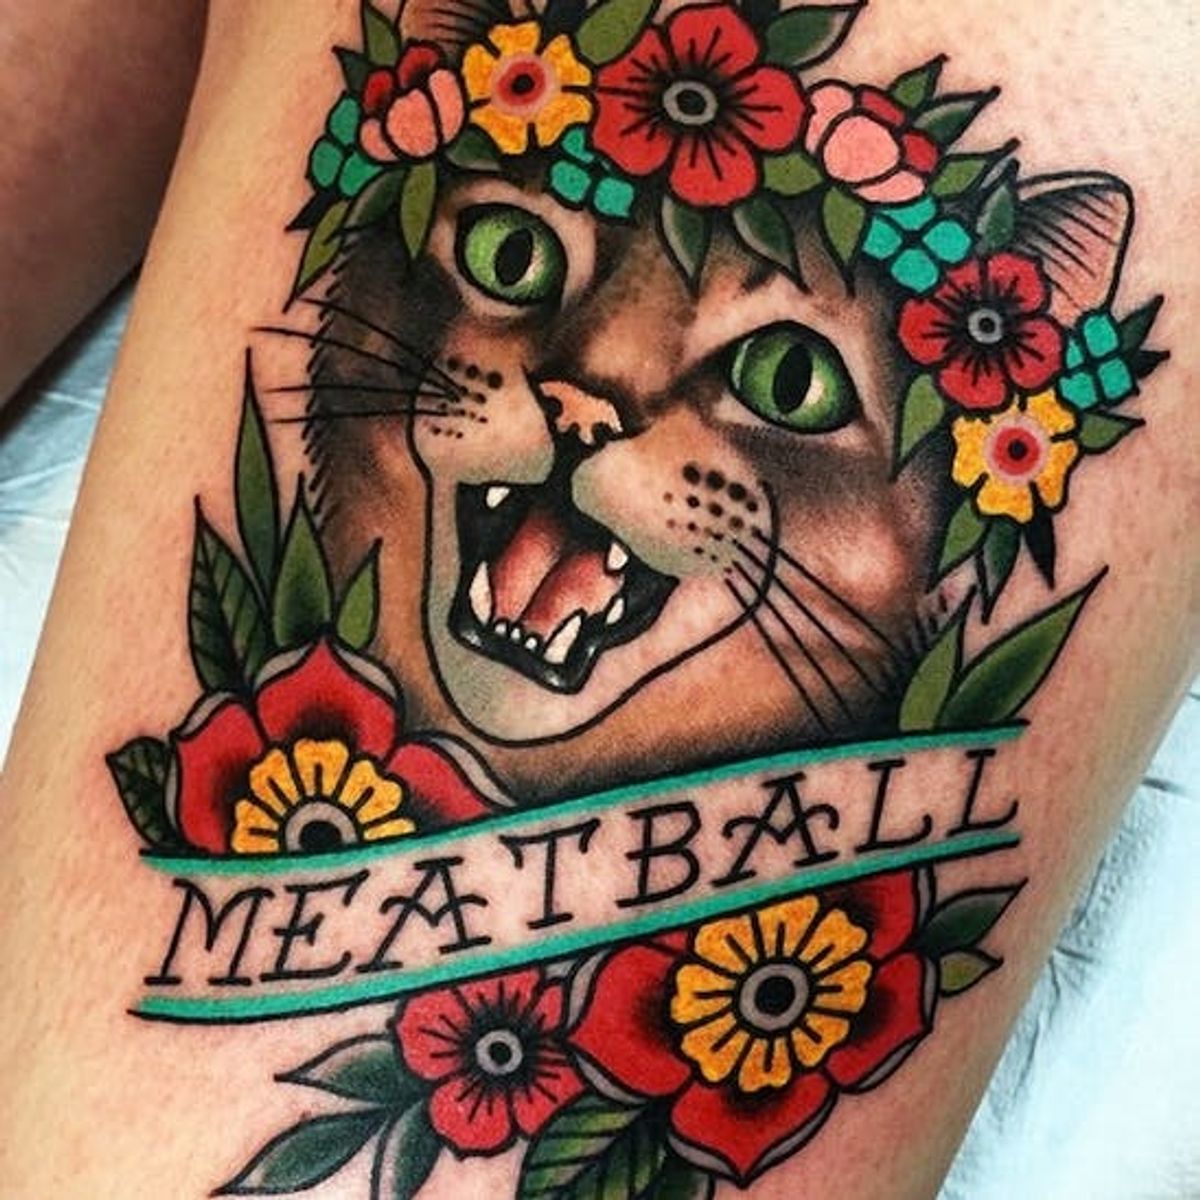 This Traditional Tattoo Artist’s Designs Are Old-School Cool